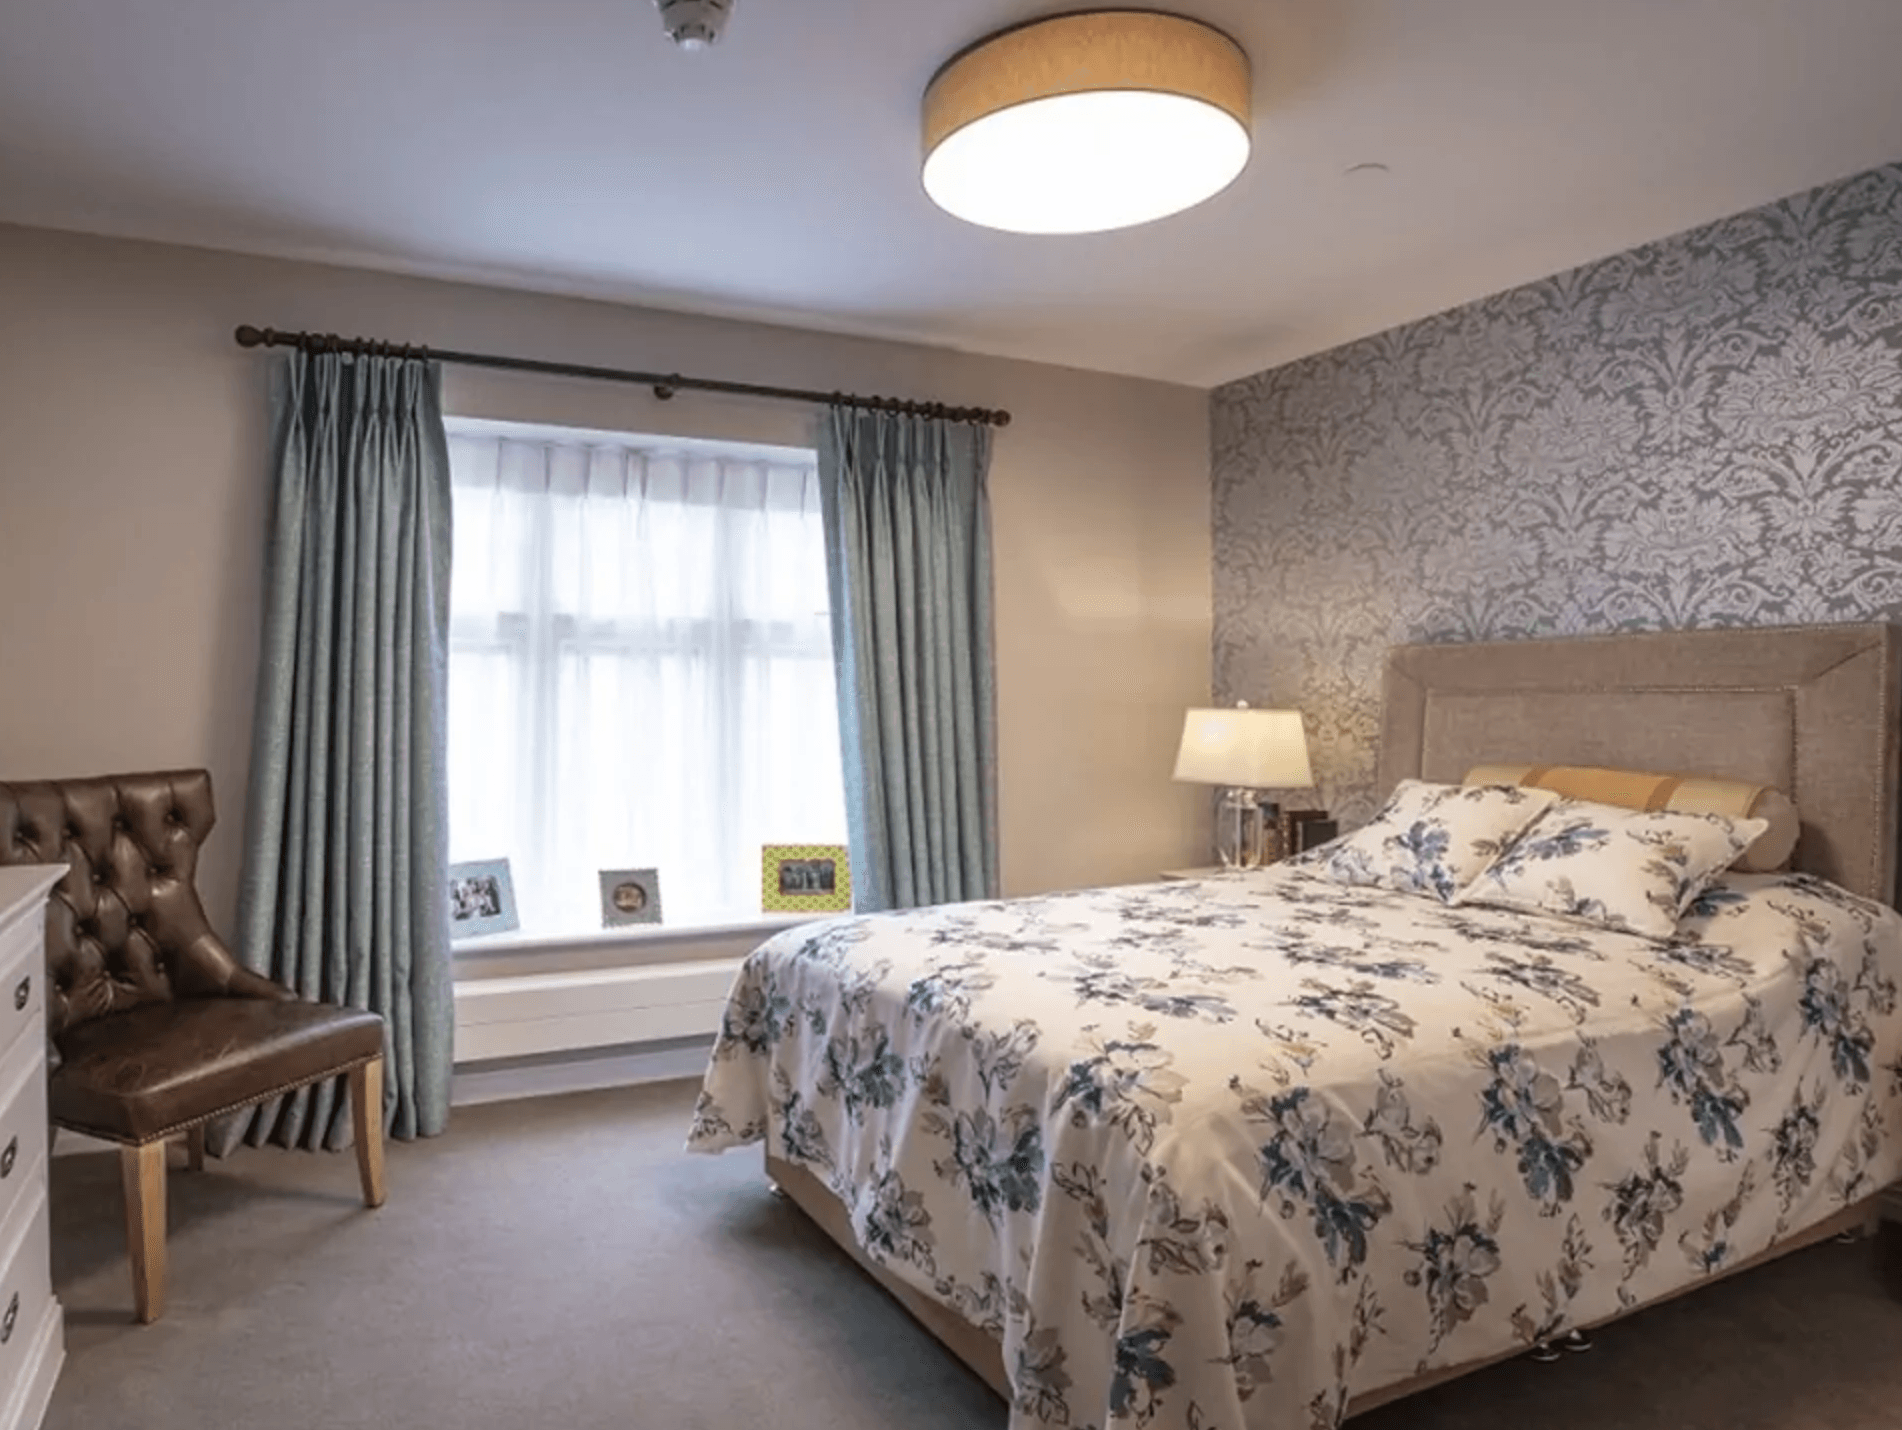 BEdroom of Bagshot Gardens Care Home in Surrey, South East England